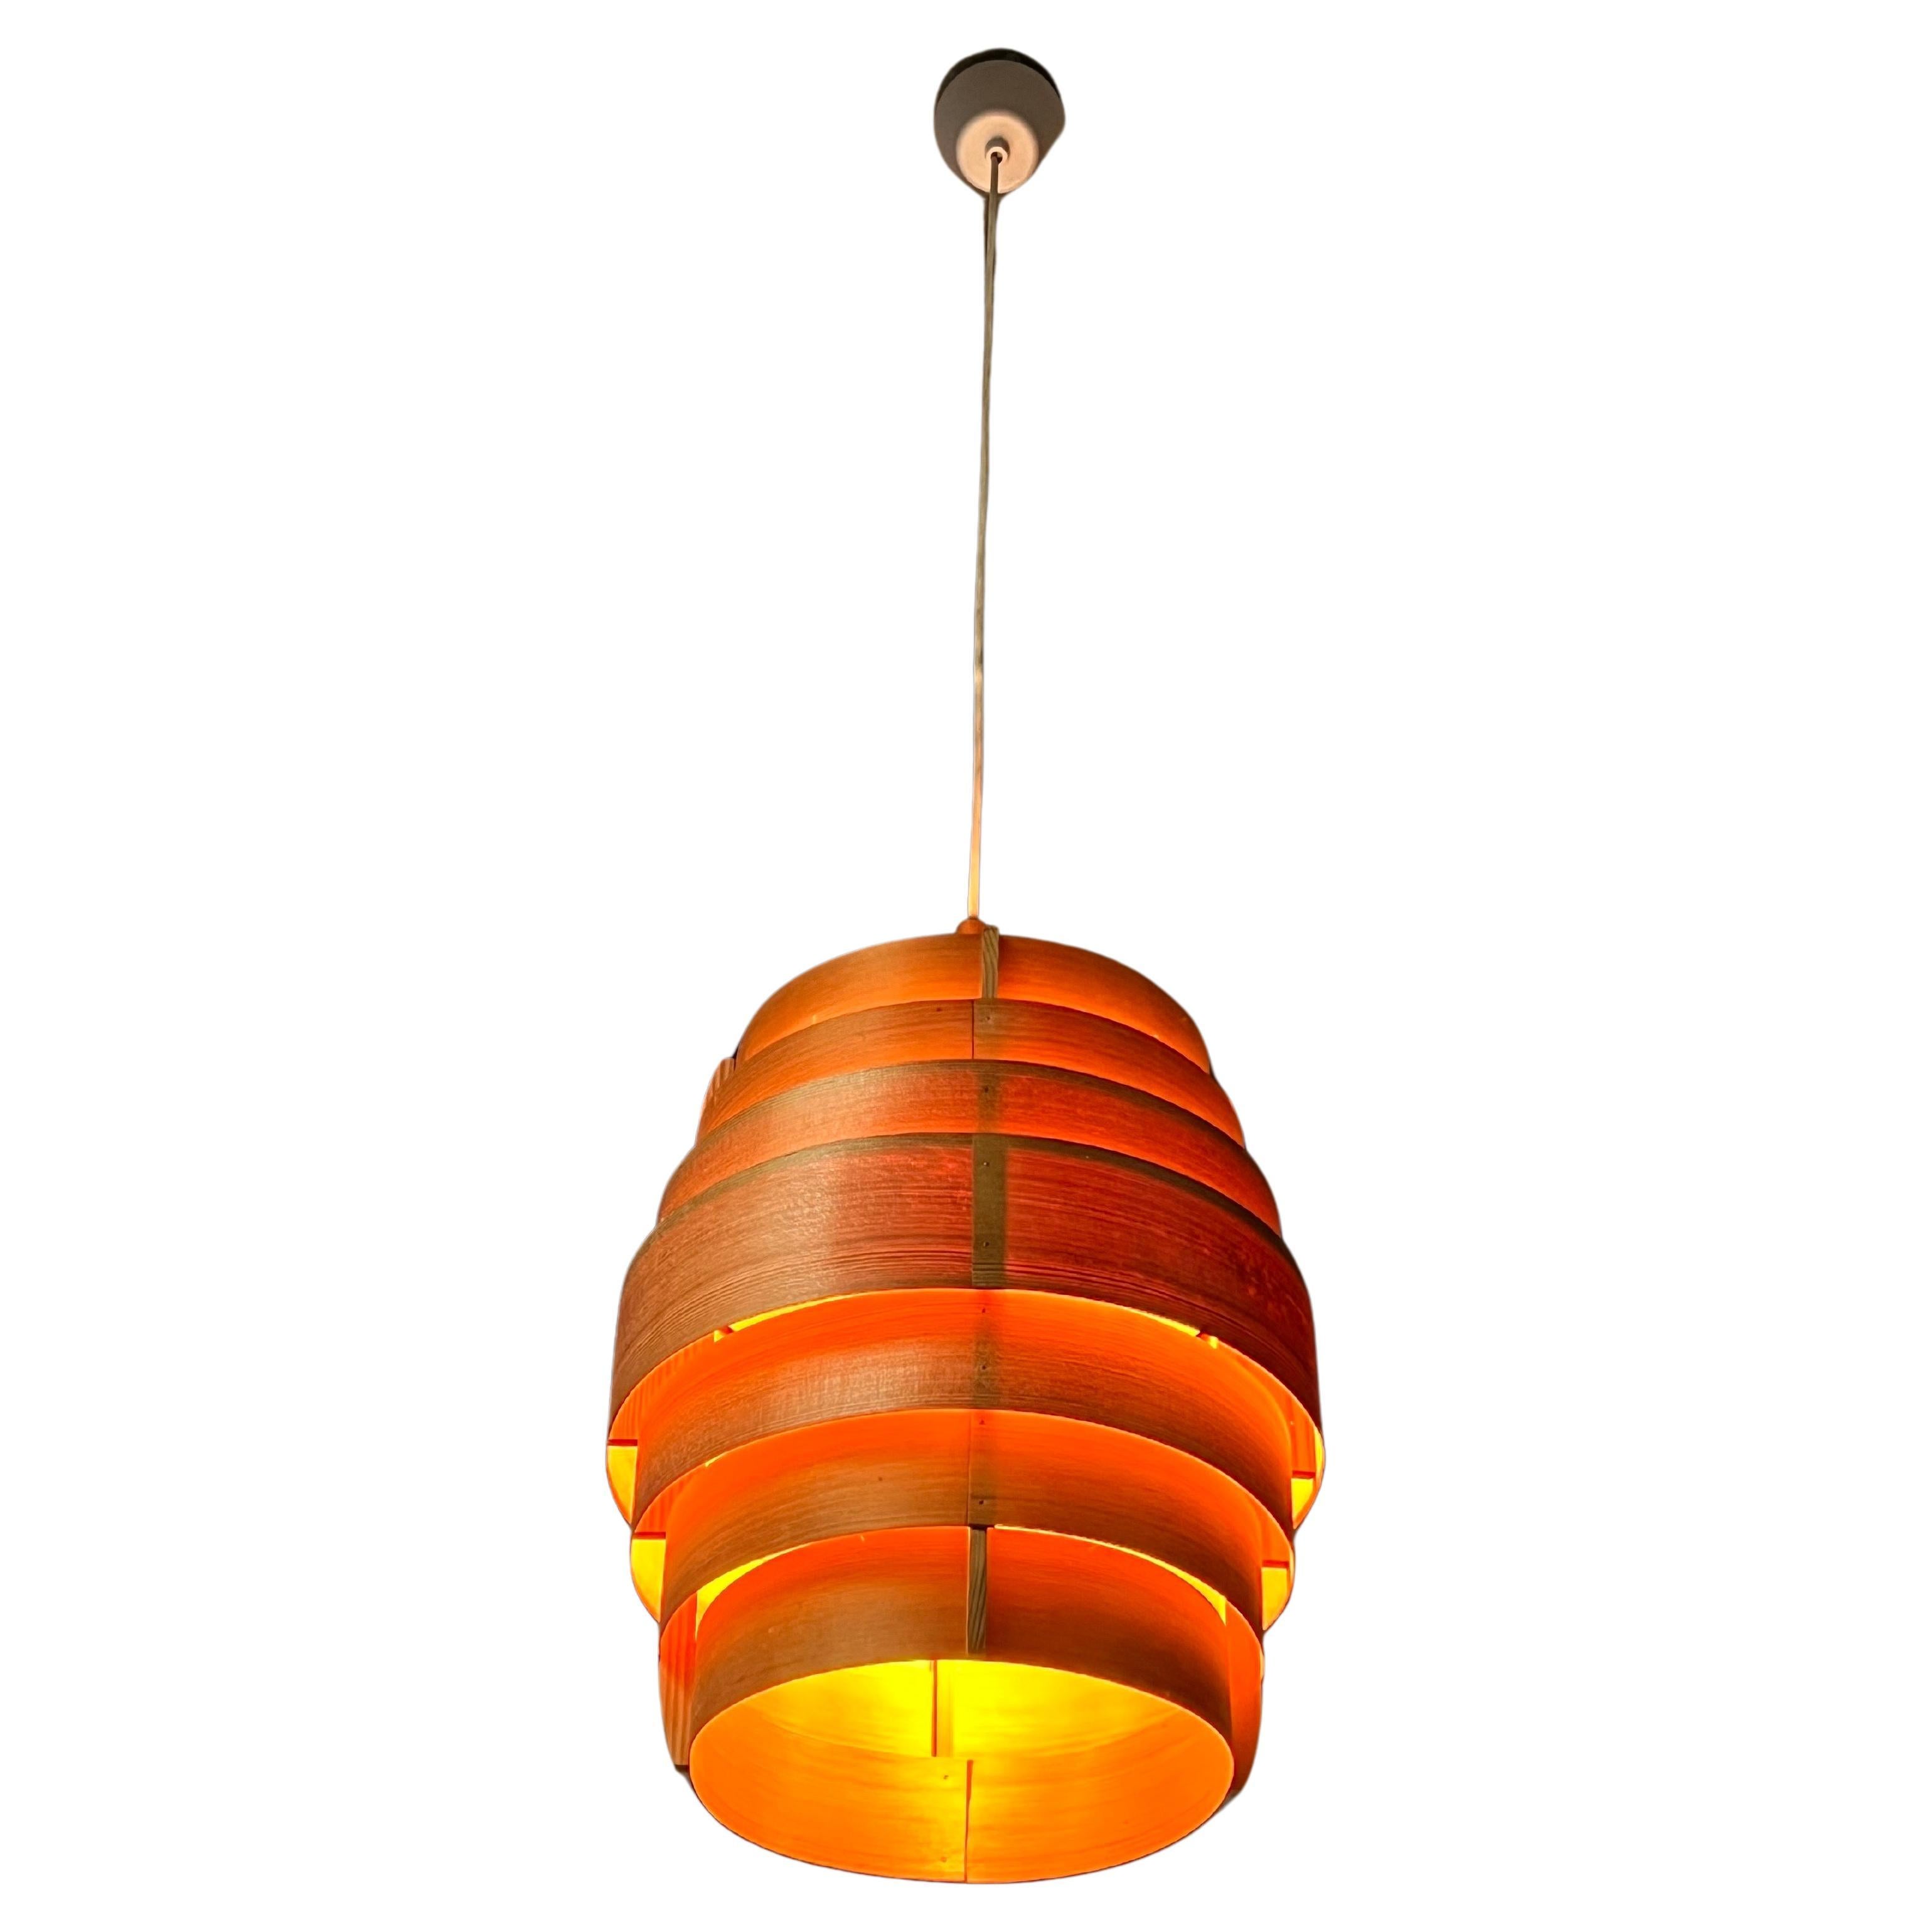 Big model pine suspension from the 1950's by Swedish master of lighting Hans Agne Jakobsson. The lamp provide a warm atmosphere and even better when lighted. Made of thin stripes of pine delicately nailed to a minimal pine frame. Working condition.